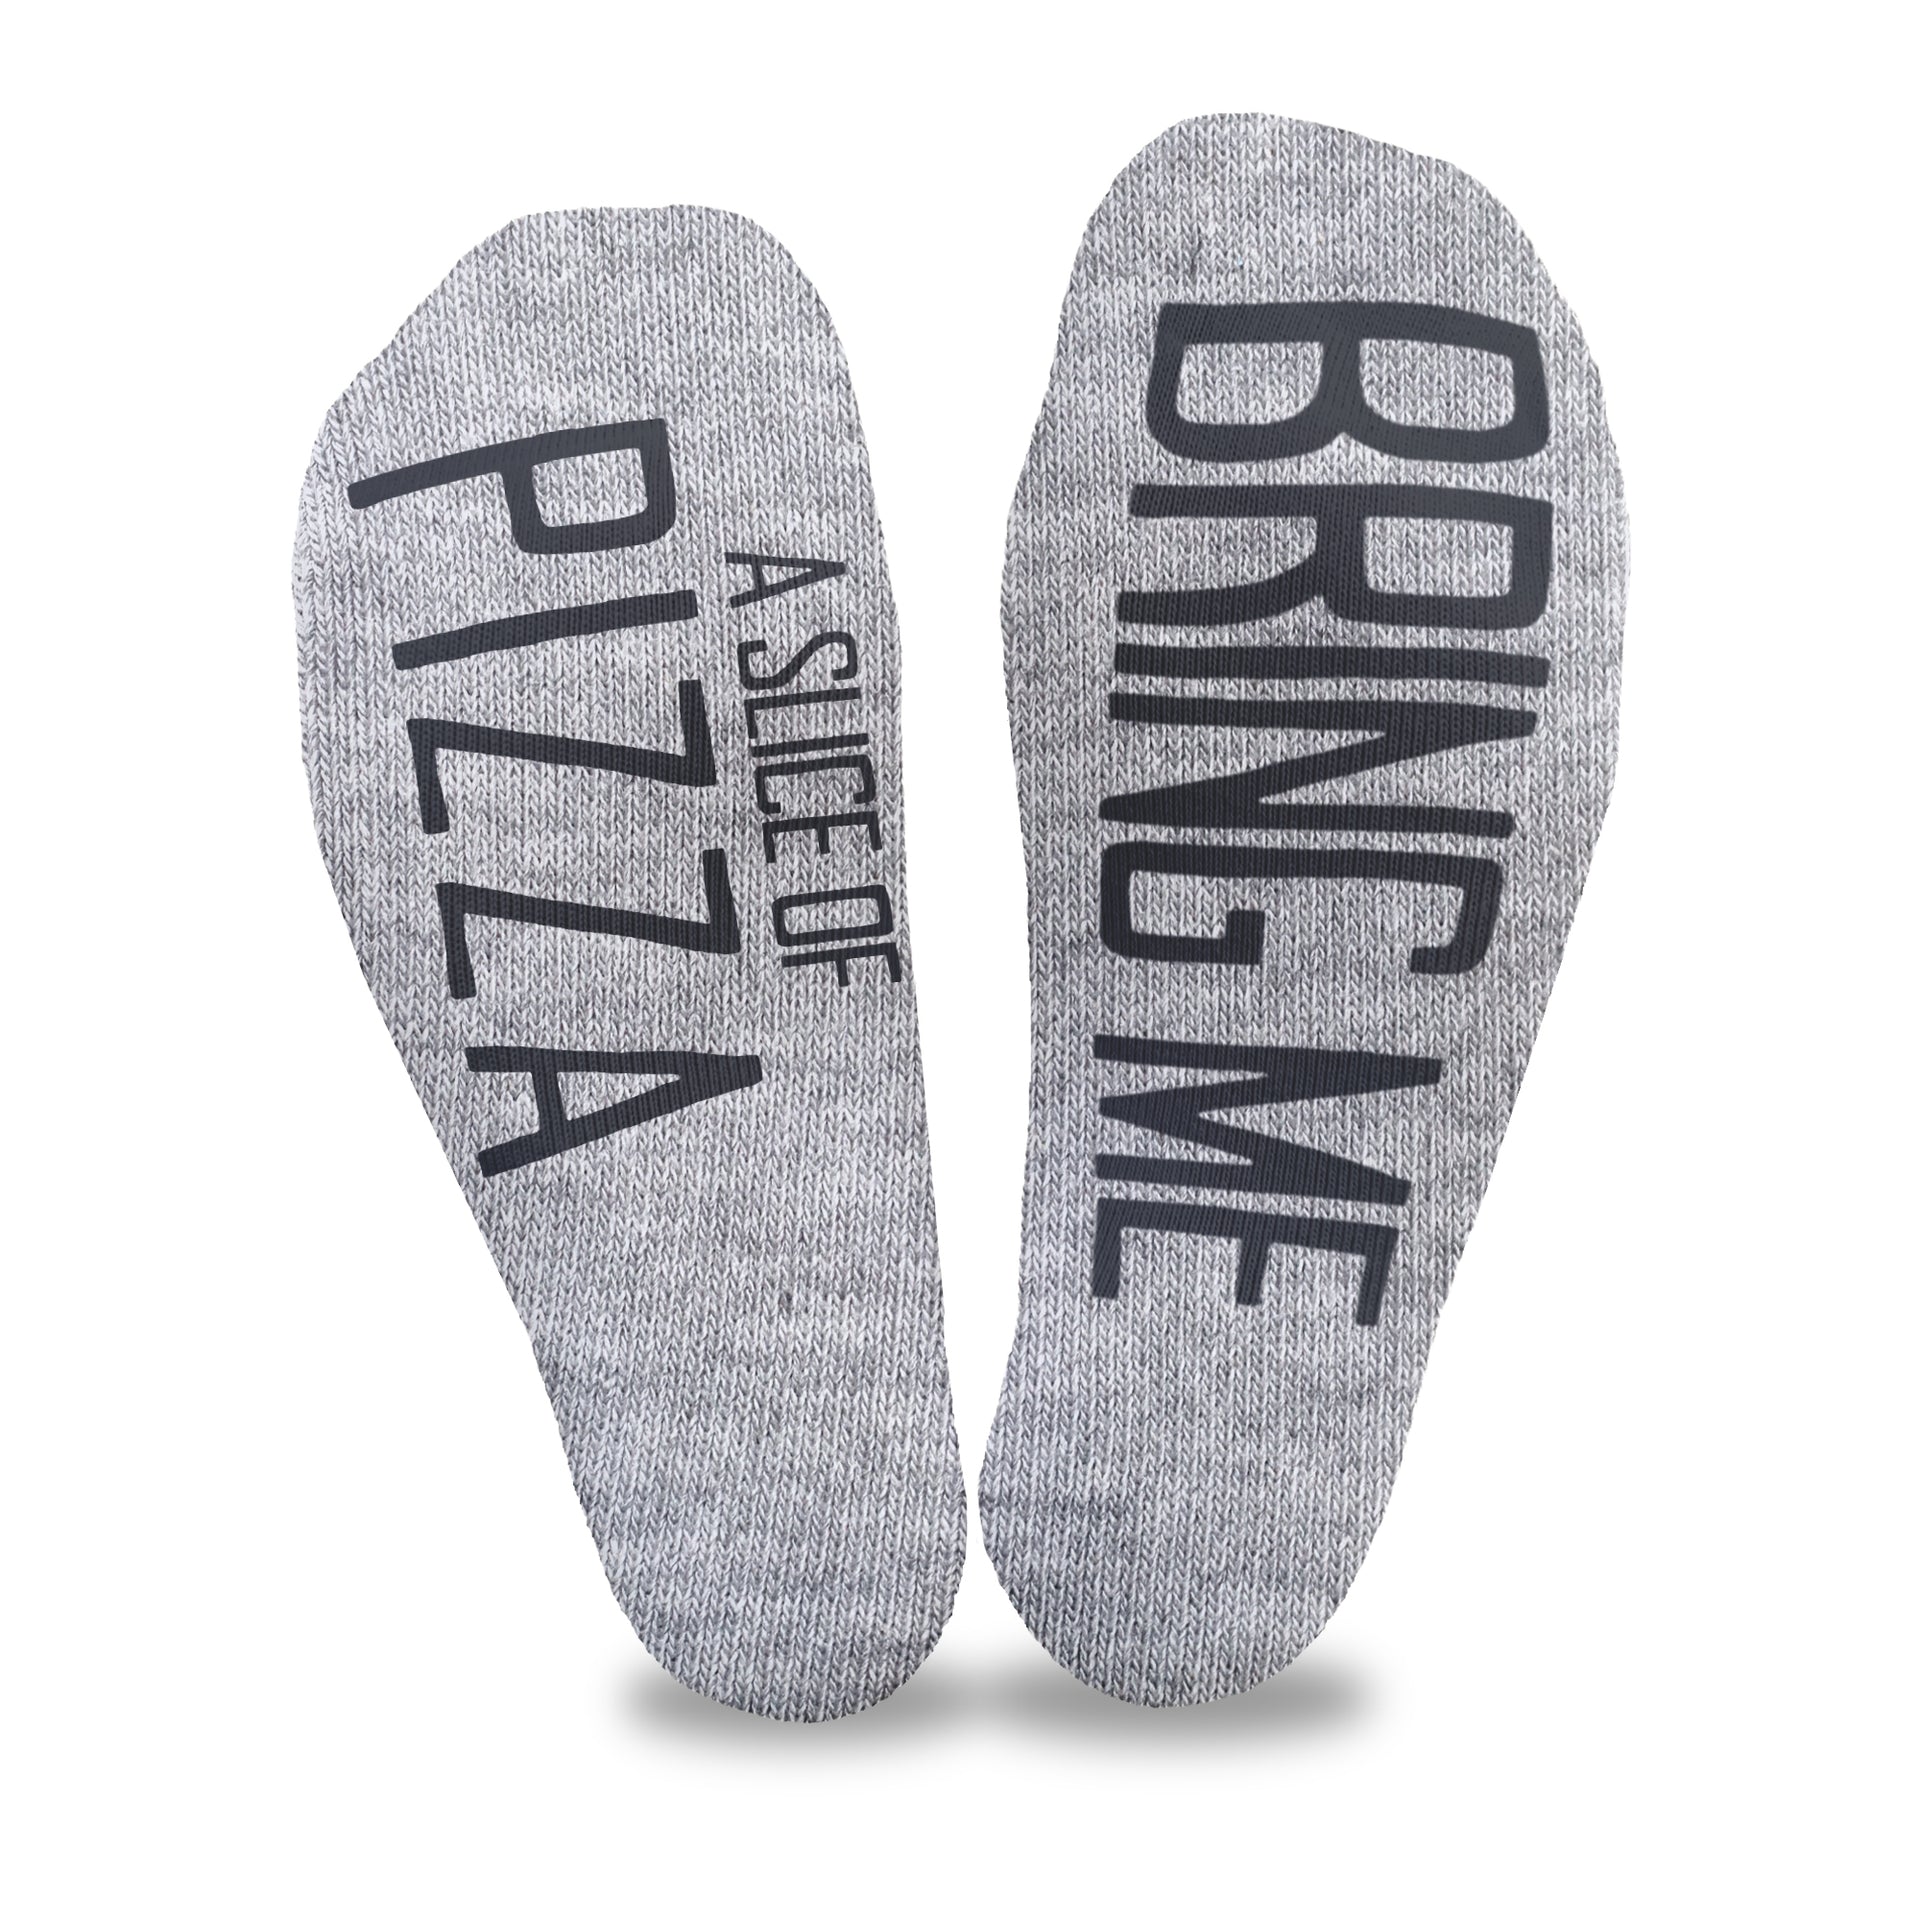 Bring me a slice of pizza custom printed in black ink on the bottom of heather gray no show footie socks is a fun way to ask for food!